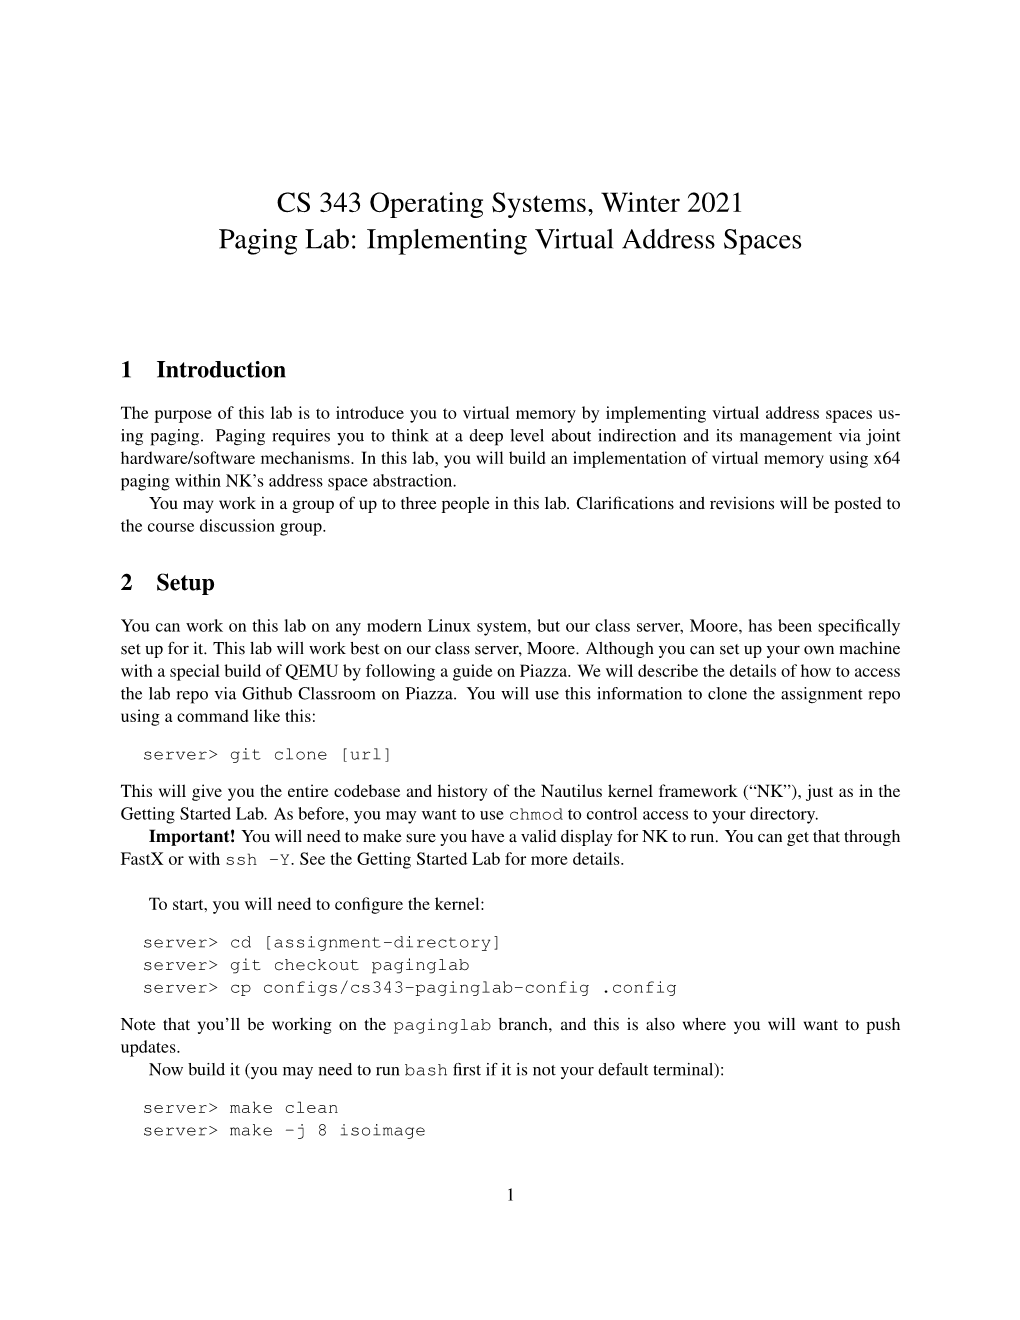 CS 343 Operating Systems, Winter 2021 Paging Lab: Implementing Virtual Address Spaces